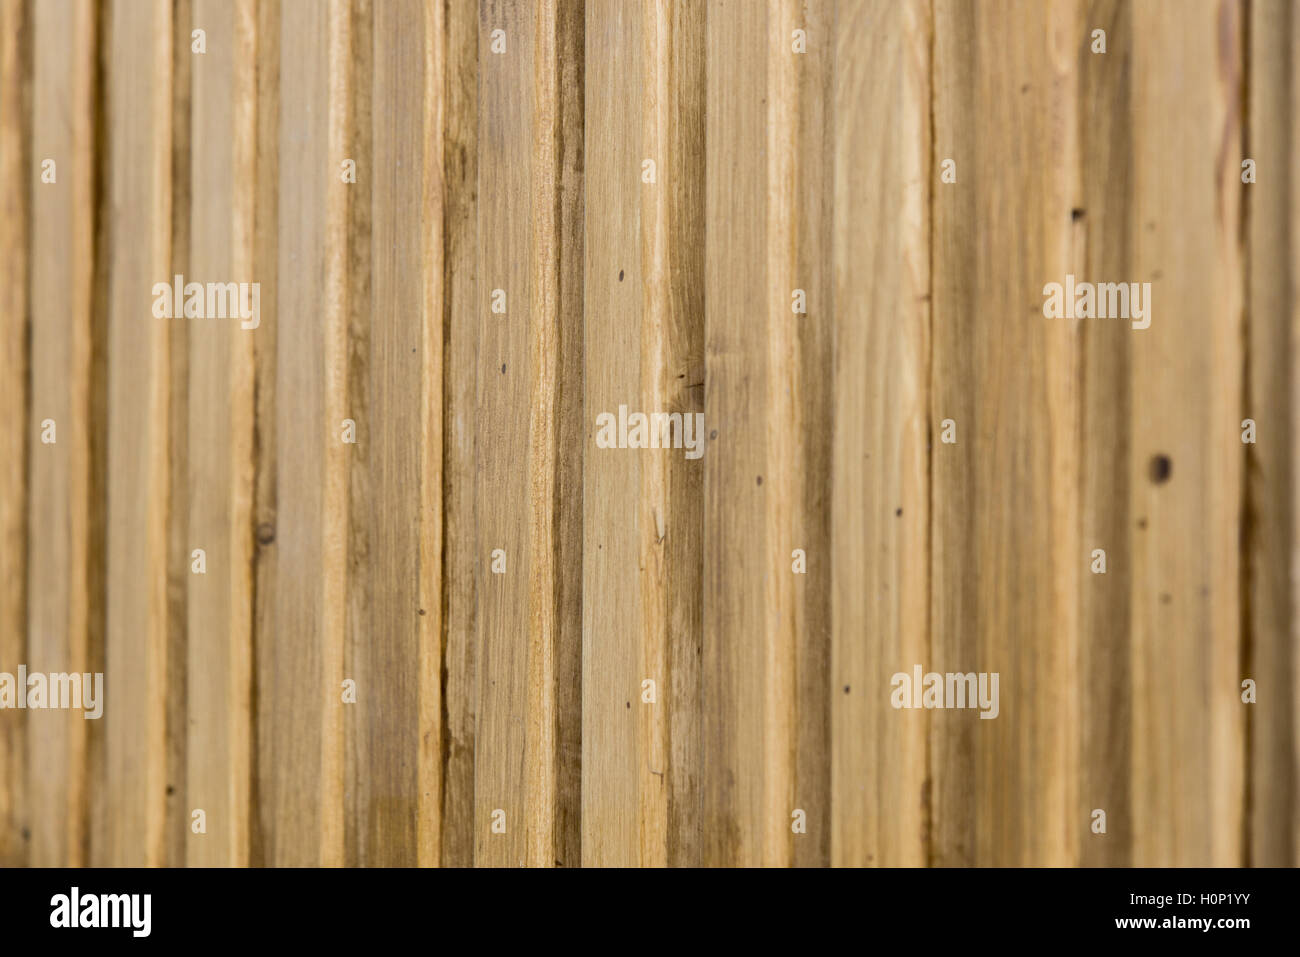 background of wooden Board with depth of field Stock Photo